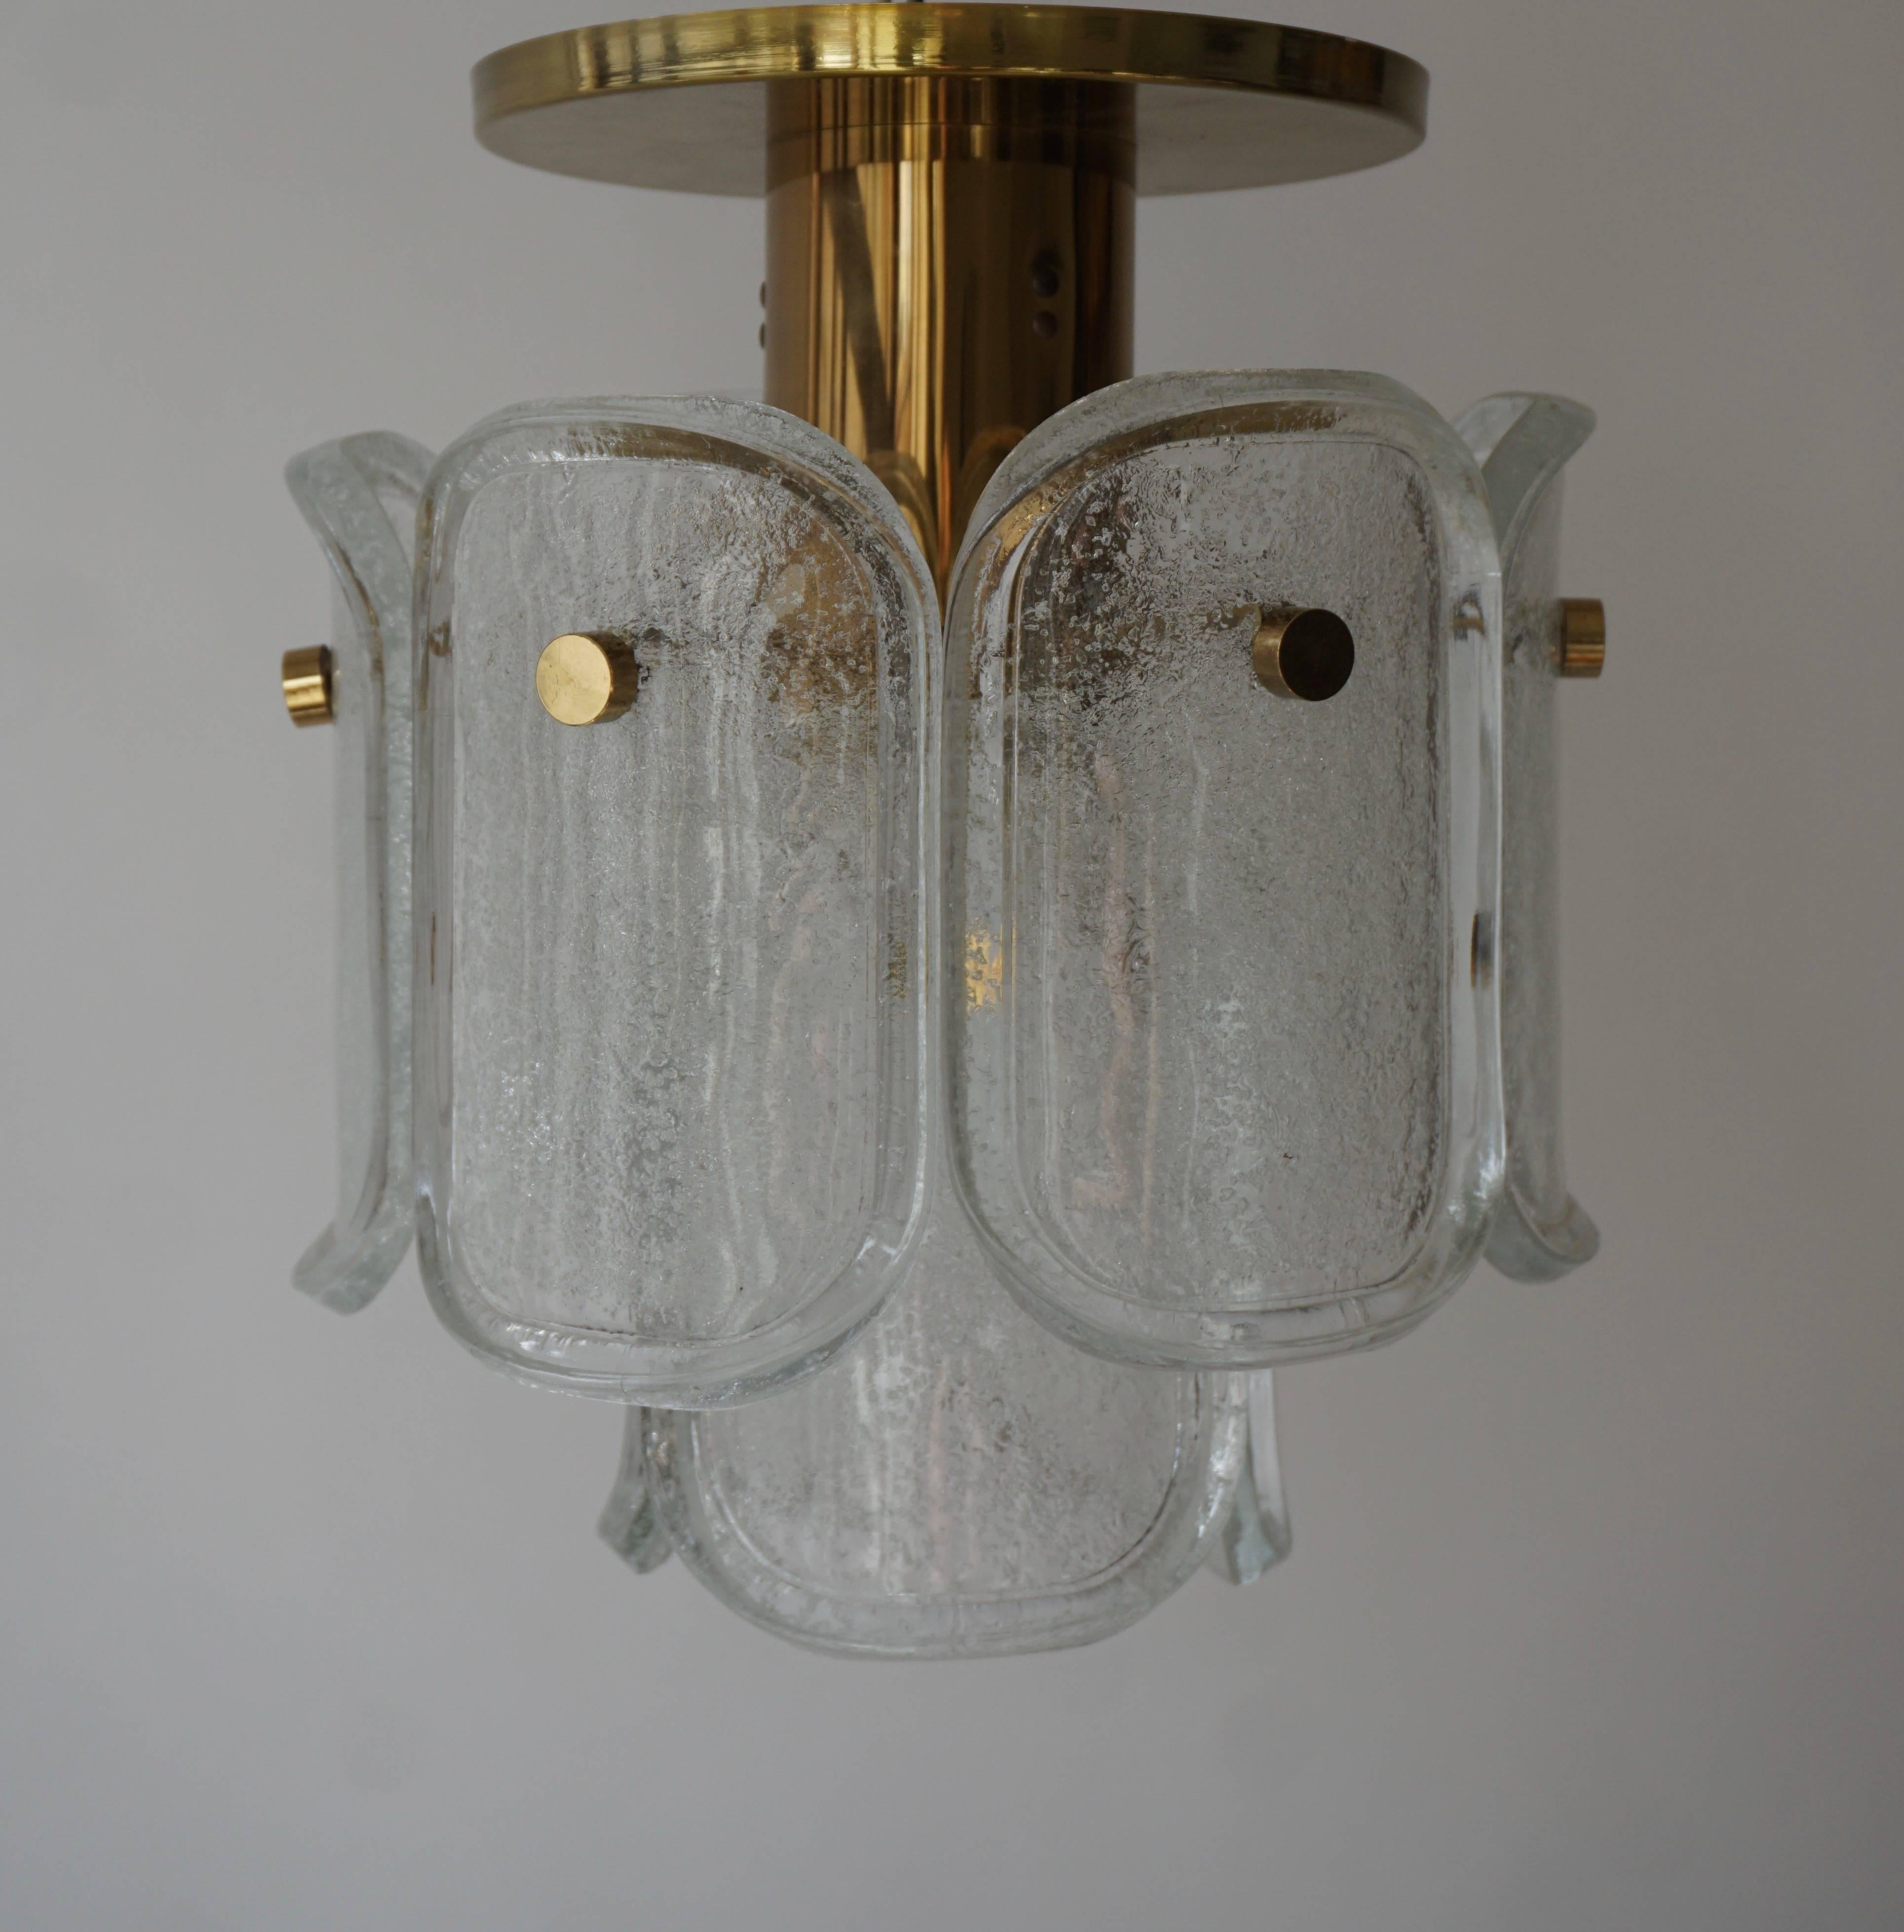 A very exquisit 24-carat gold-plated brass and clear brillant glass 'Palazzo' flush mount light by J.T. Kalmar, Vienna, Austria, manufactured in circa 1970 (late 1960s and early 1970s).
This light are handmade and high quality pieces. Large